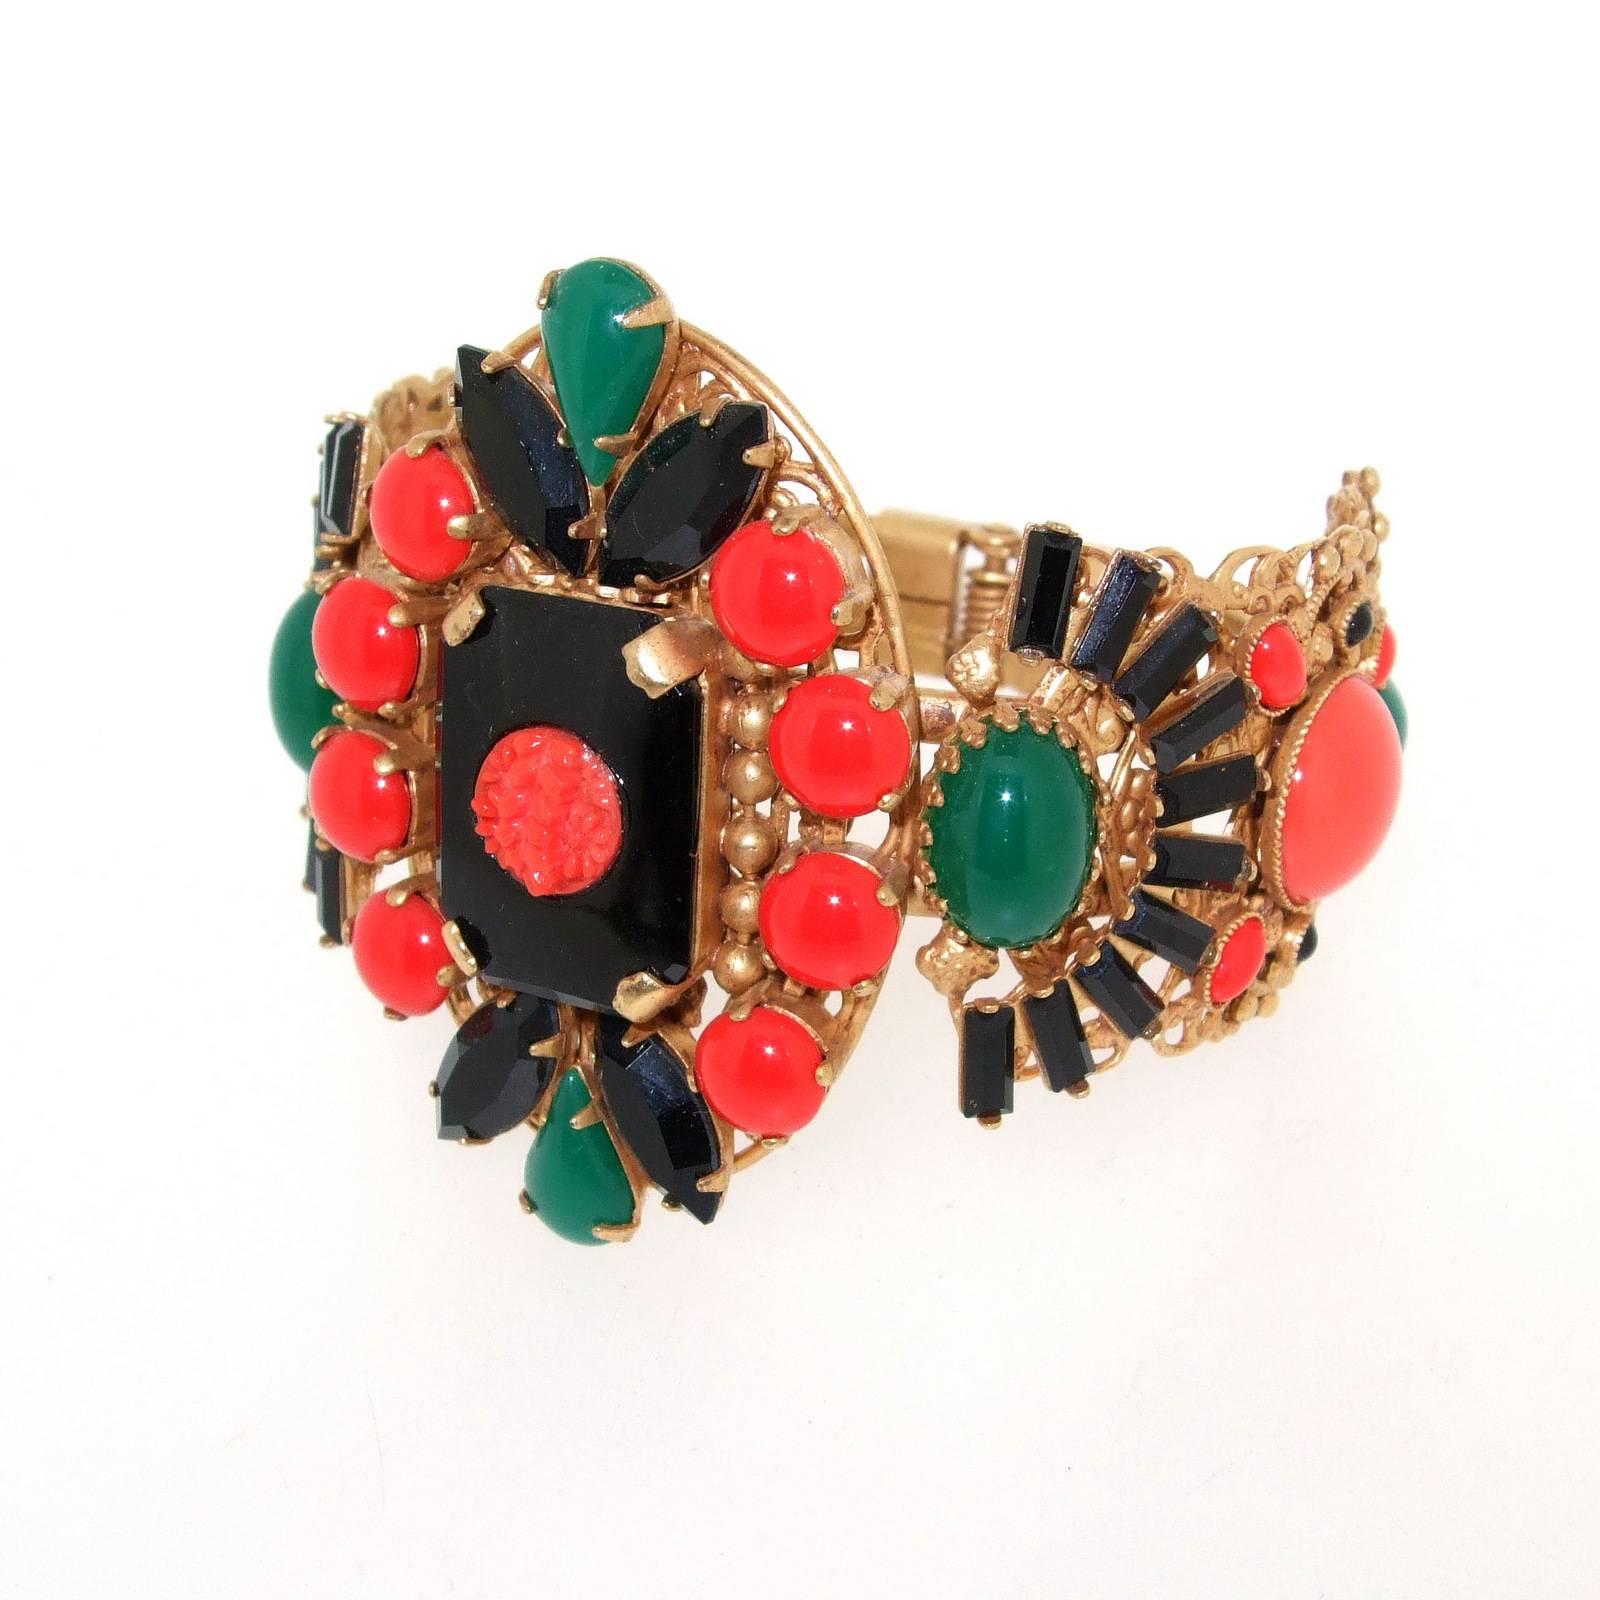 An exquisite Art Deco style clamper bracelet by Askew London. Set with vintage glass, the centre piece emulating carved coral, with striking black, coral and jade effect glass, each setting  the other colour off. 

Each Askew piece is handmade by